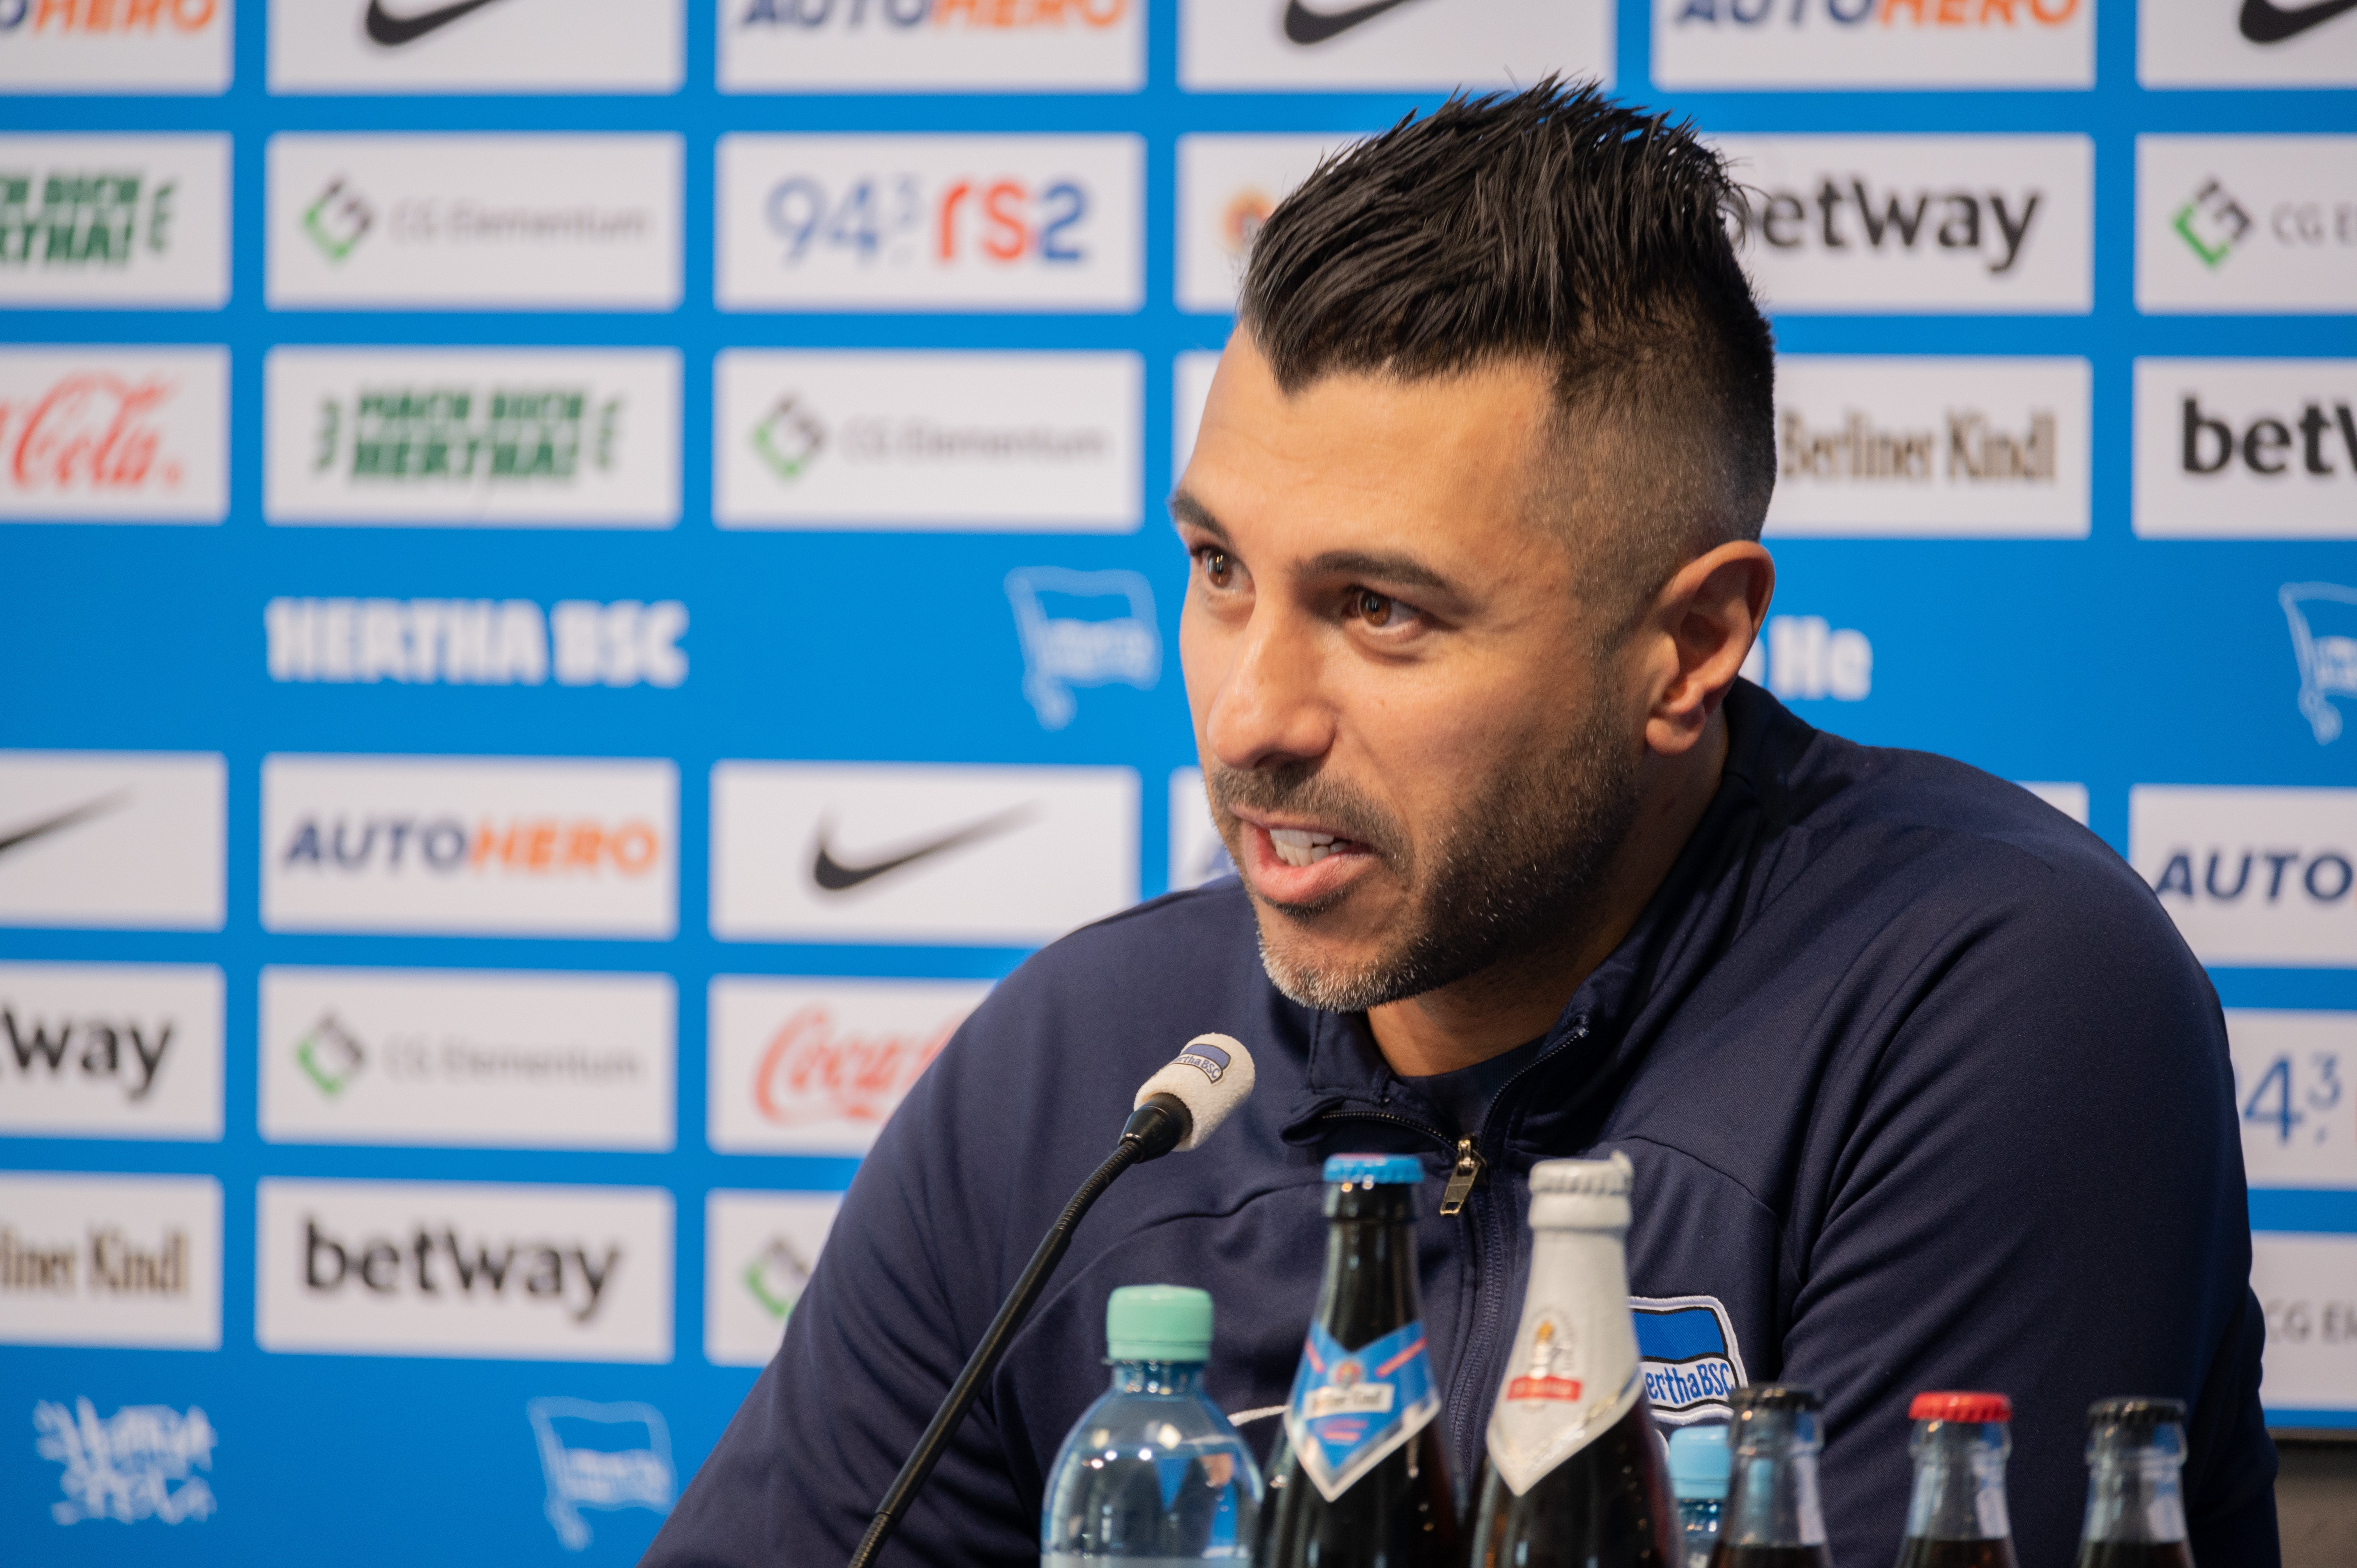 Volkan Bulut speaks to the media at the press conference.